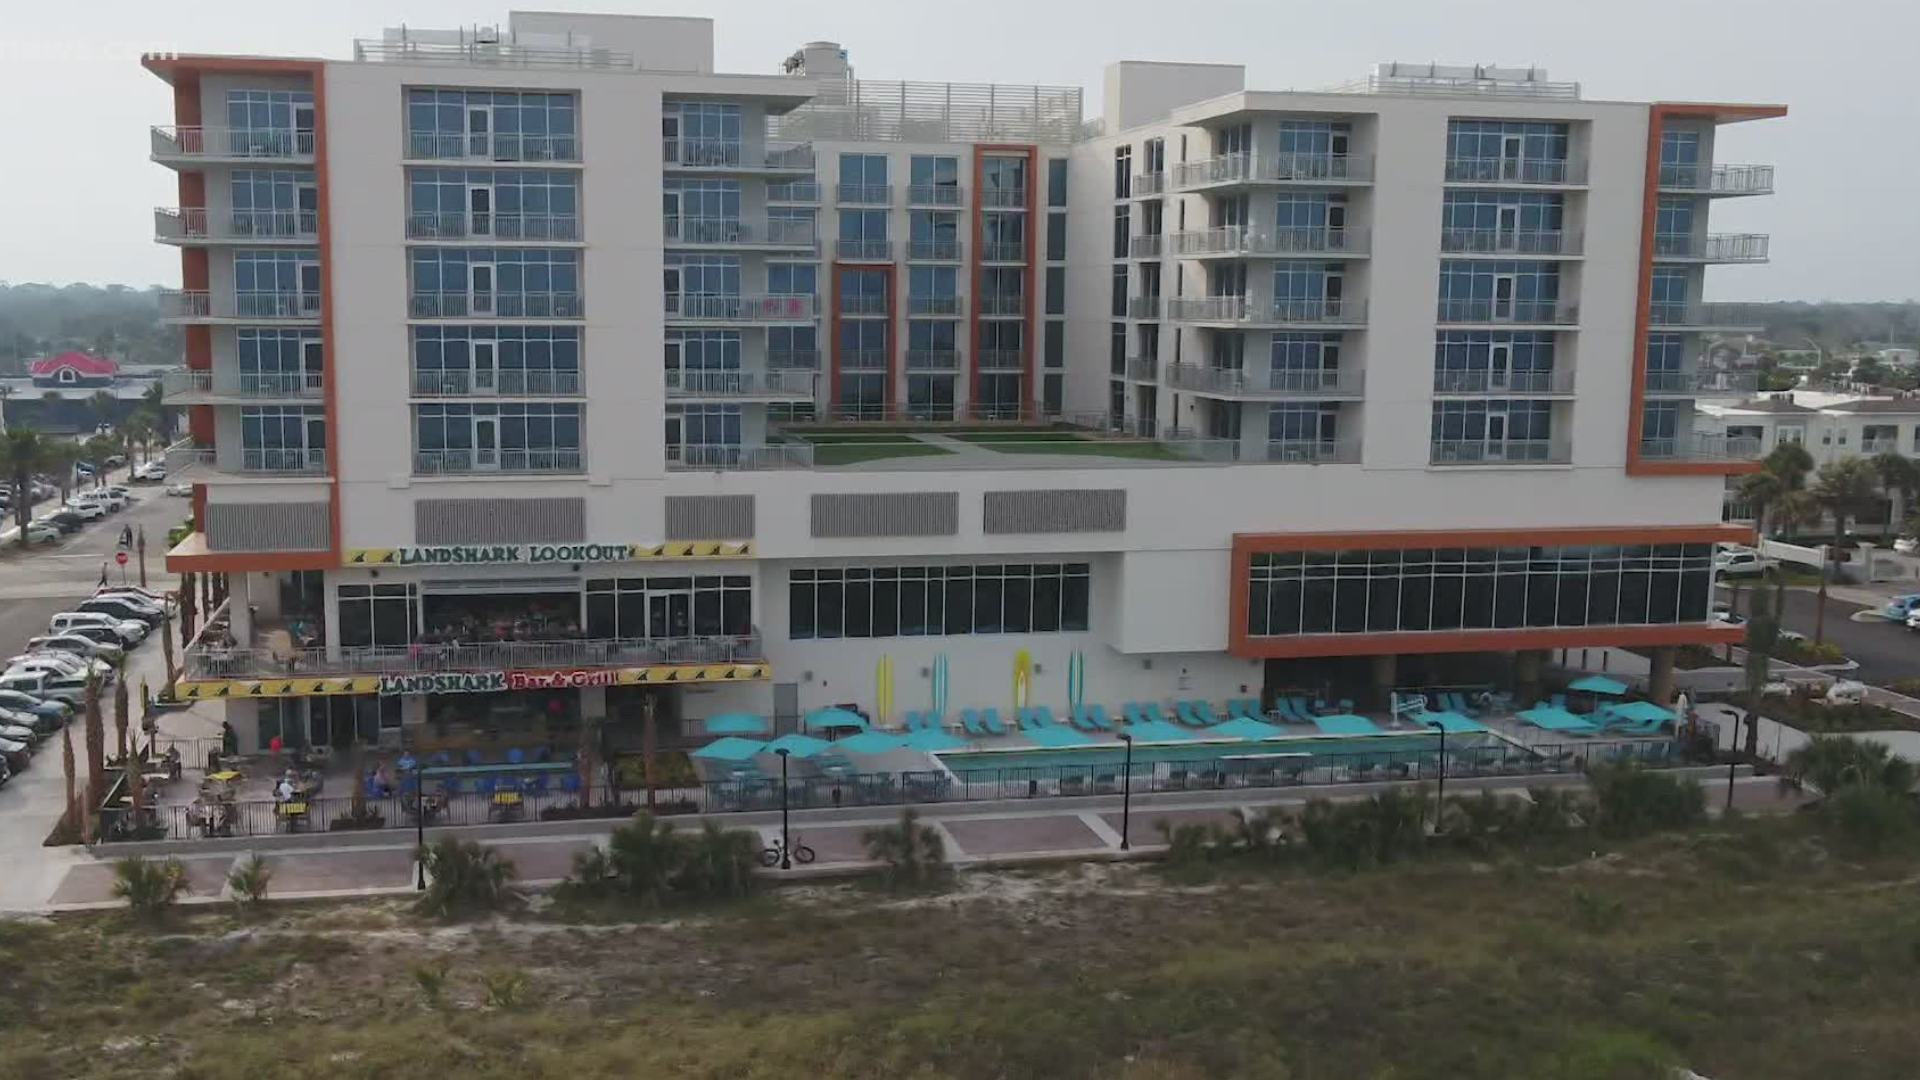 The Margaritaville Hotel in Jax Beach, which opened ahead of schedule despite the pandemic, is expected to bring hundreds of jobs and lift up surrounding businesses.